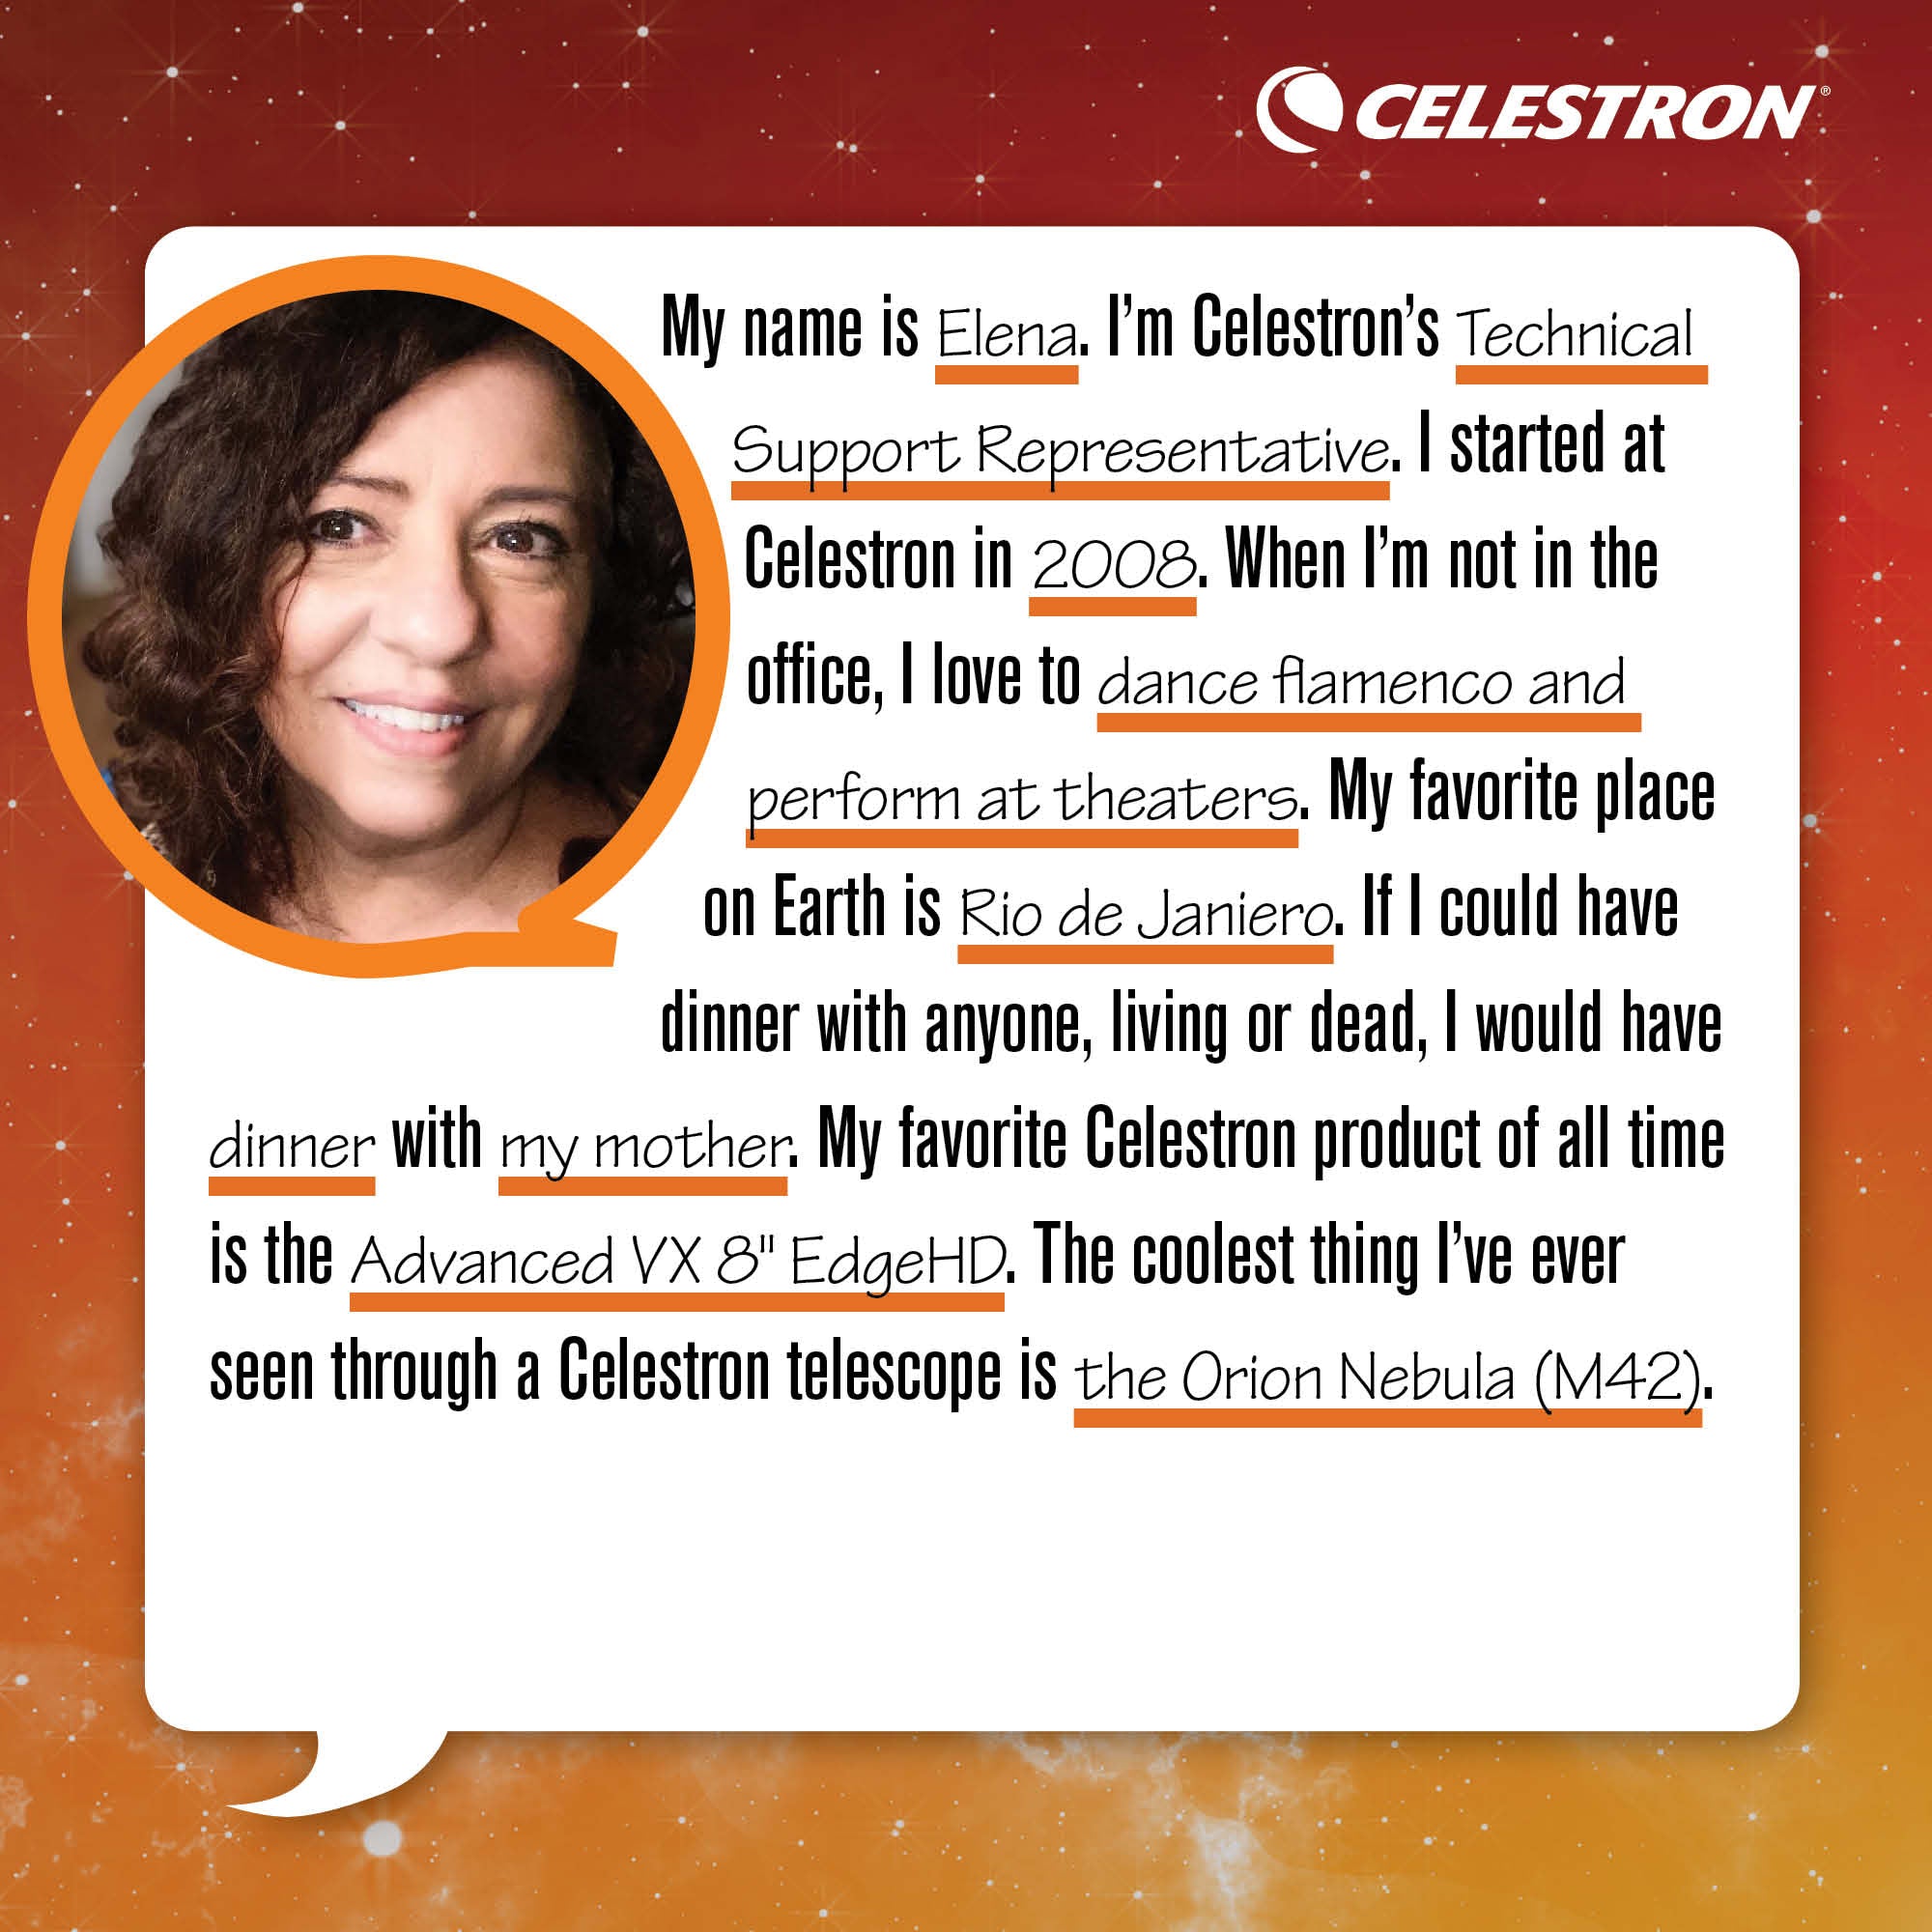 My name is Christian. I'm Celestron's Shipping Clerk. I started at Celestron in 2008. When I'm not in the office, I love to fly airplanes and helicopters and perform at theaters.  My favorite place on Earth is Puerto Rico. If I could have dinner with anyone, living or dead, I would have pizza with my dad. My favorite Celestron product of all time is the Night Vision Scope. The coolest thing I’ve ever seen through a Celestron telescope is Uranus and the Moon.